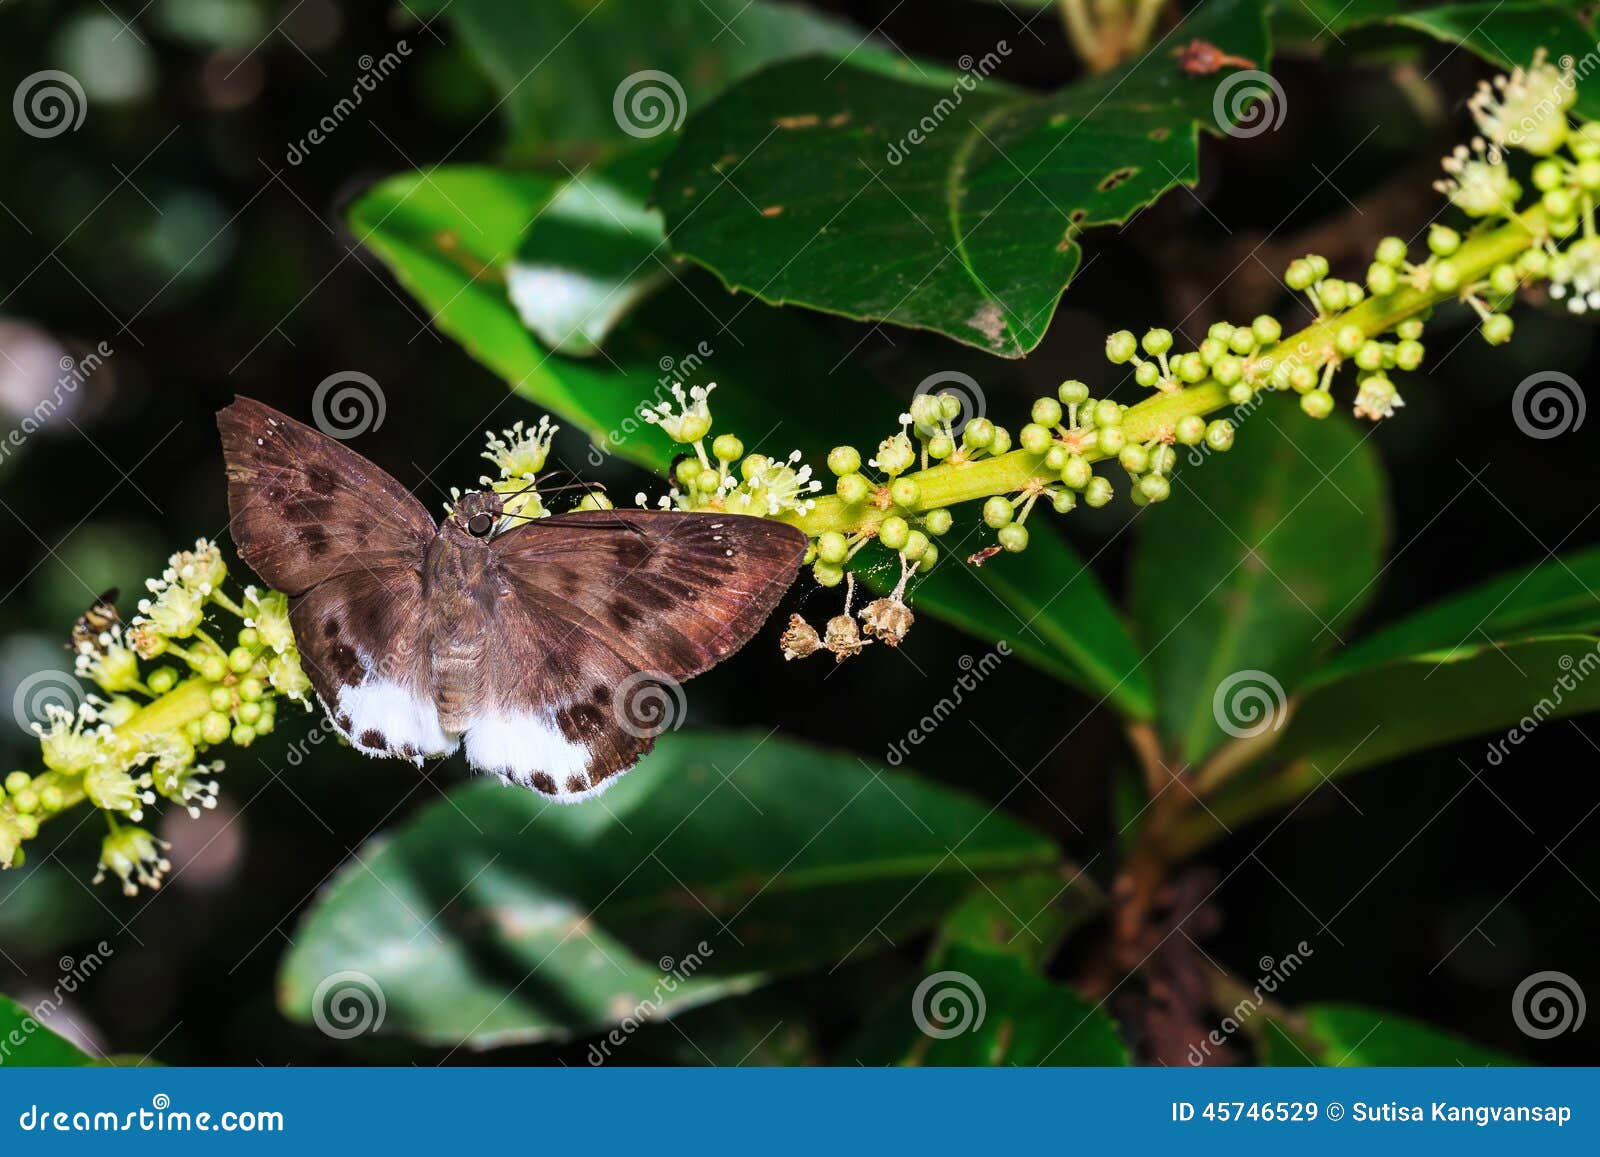 The Spotted Snow Flat Butterfly Stock Image - Image of snow, butterfly